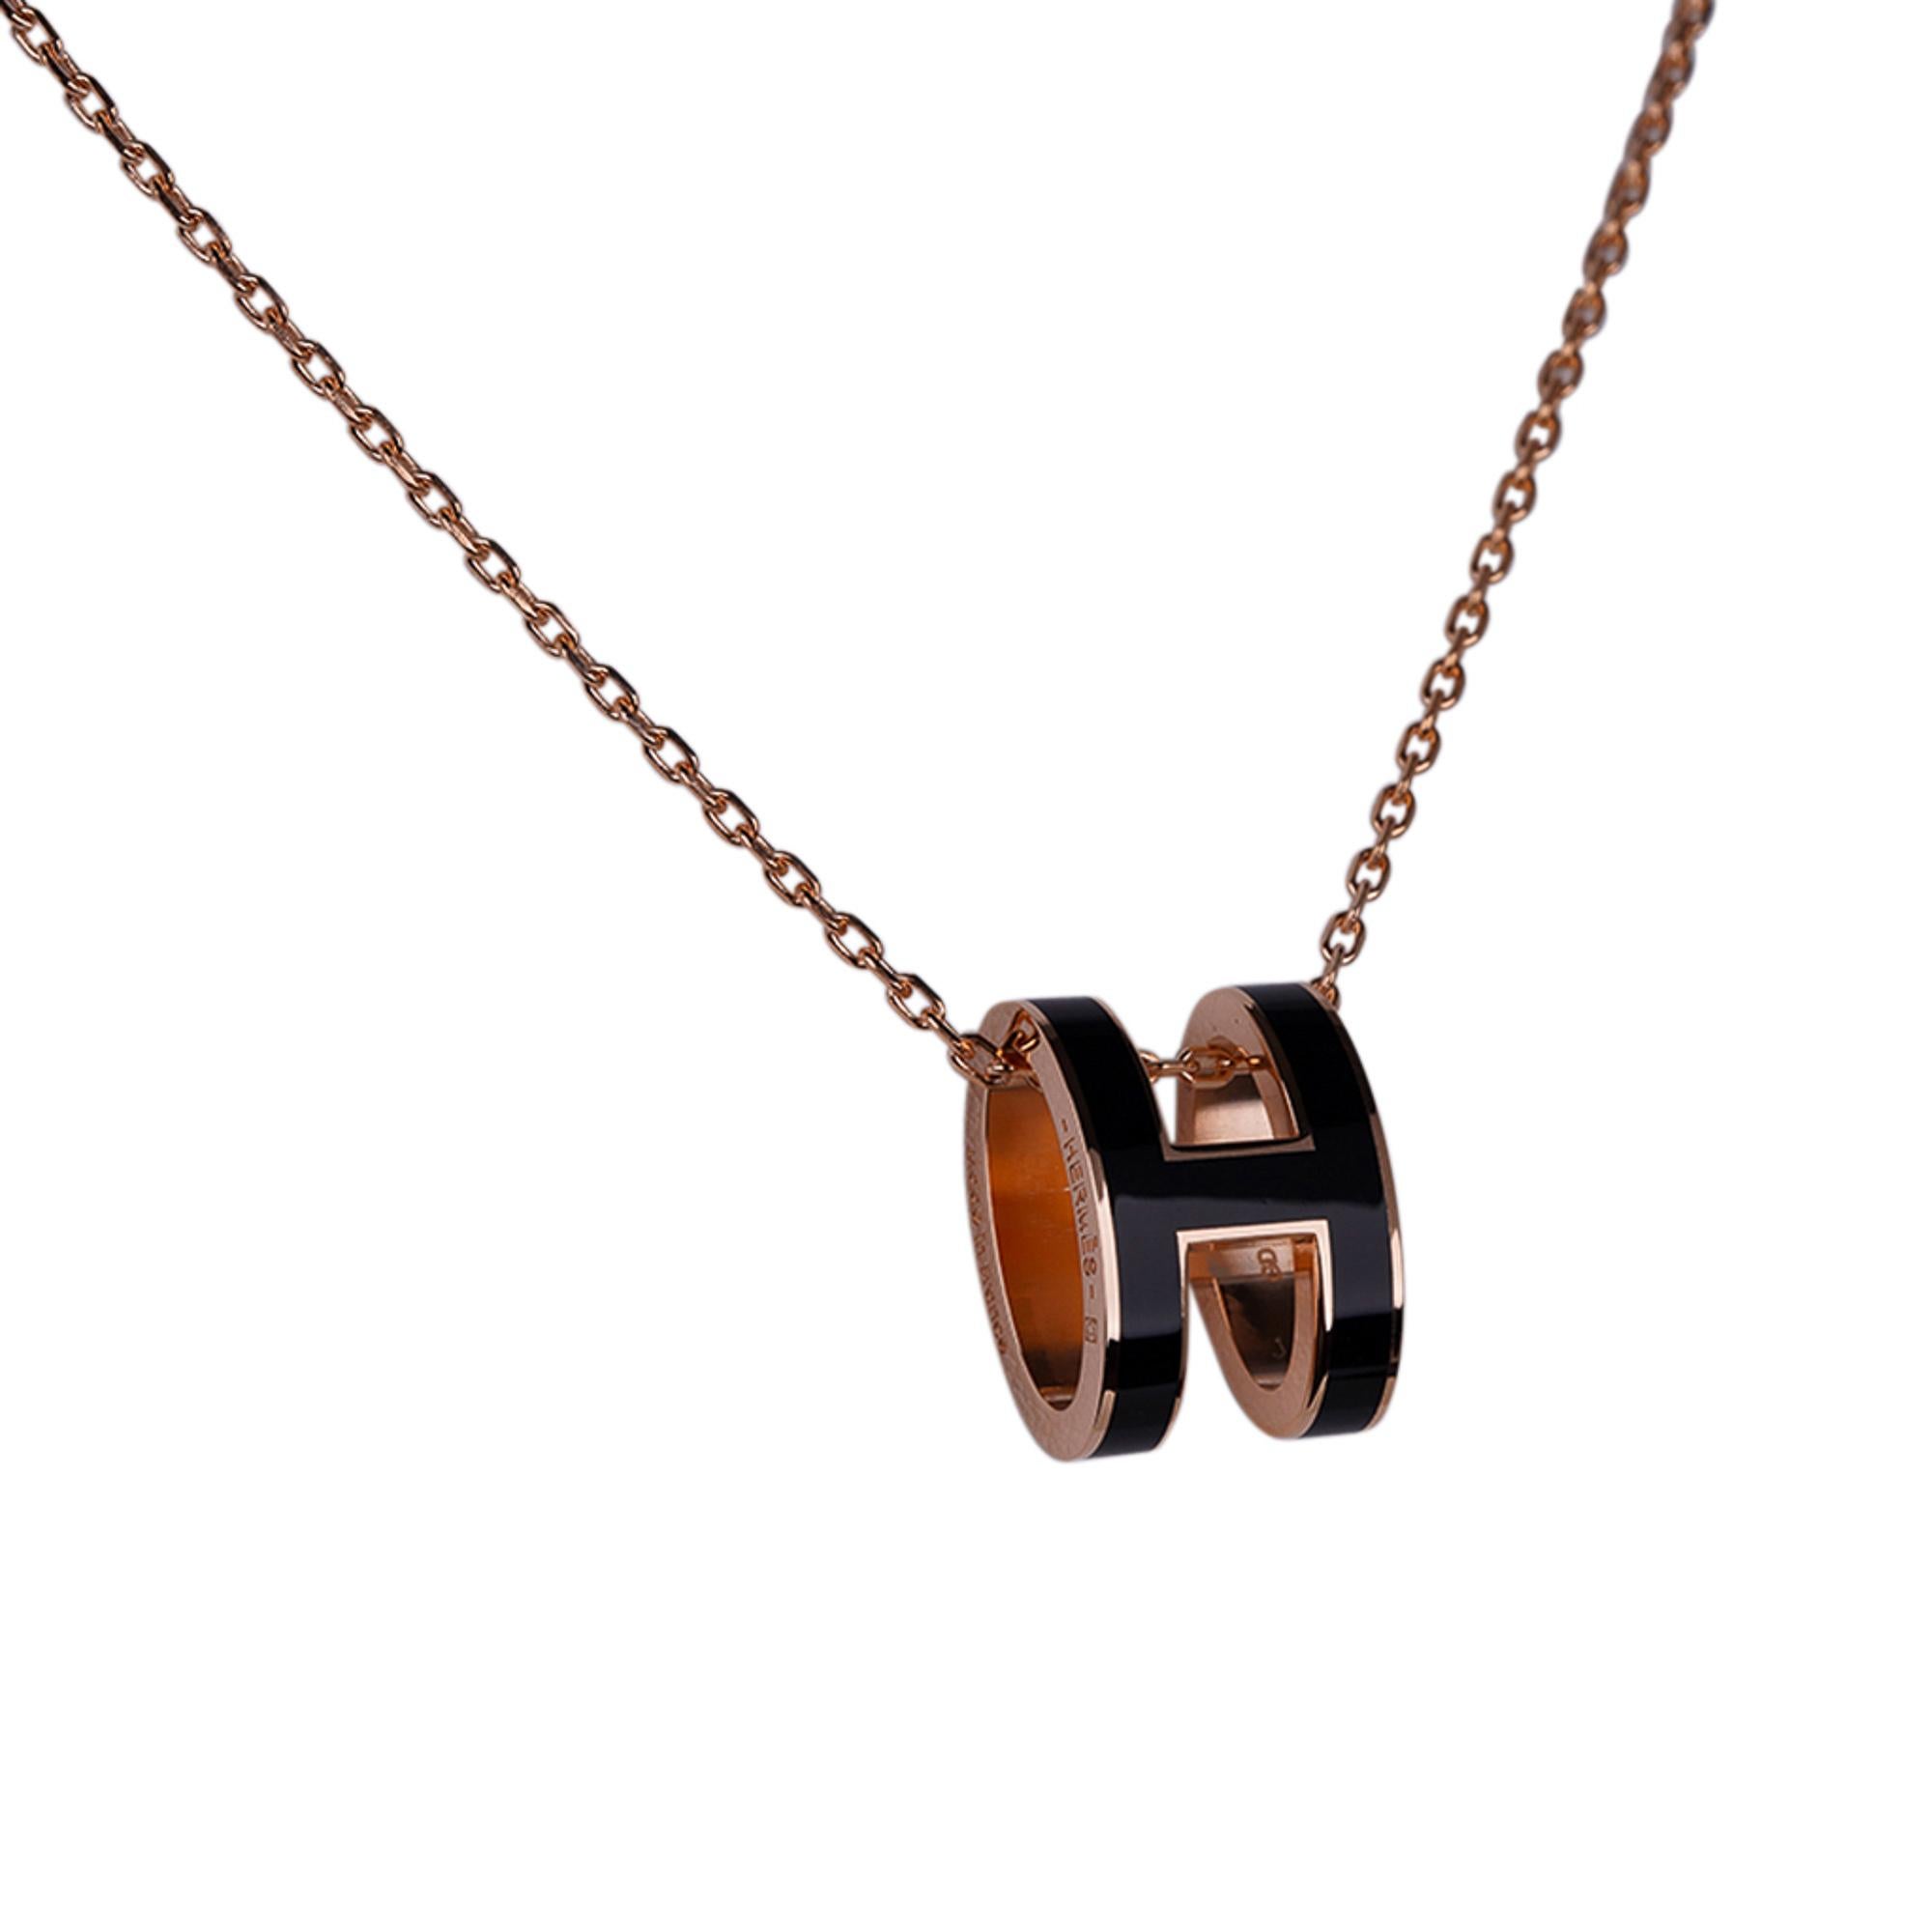 Mightychic offers a Mini Hermes Pop H Necklace featured in Black lacquered metal.
Pop H pendant on 16